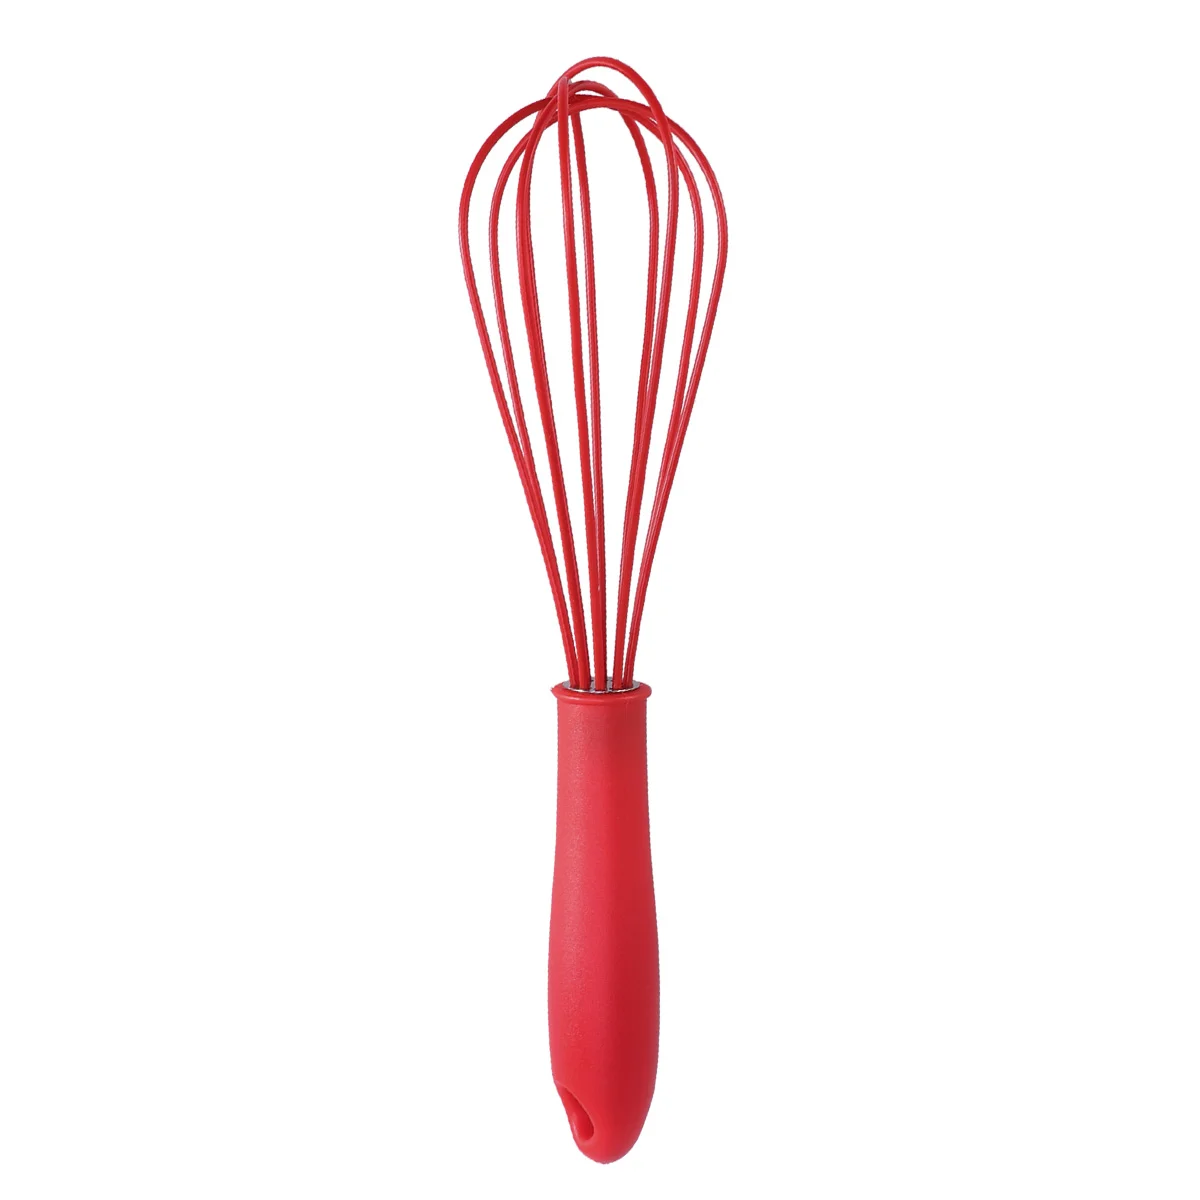 

Egg Whisk Mixer Beater Handkitchen Silicone Frother Manual Steel Wire Stainless Wisking Tool Balloon Blender Baking Gadgets